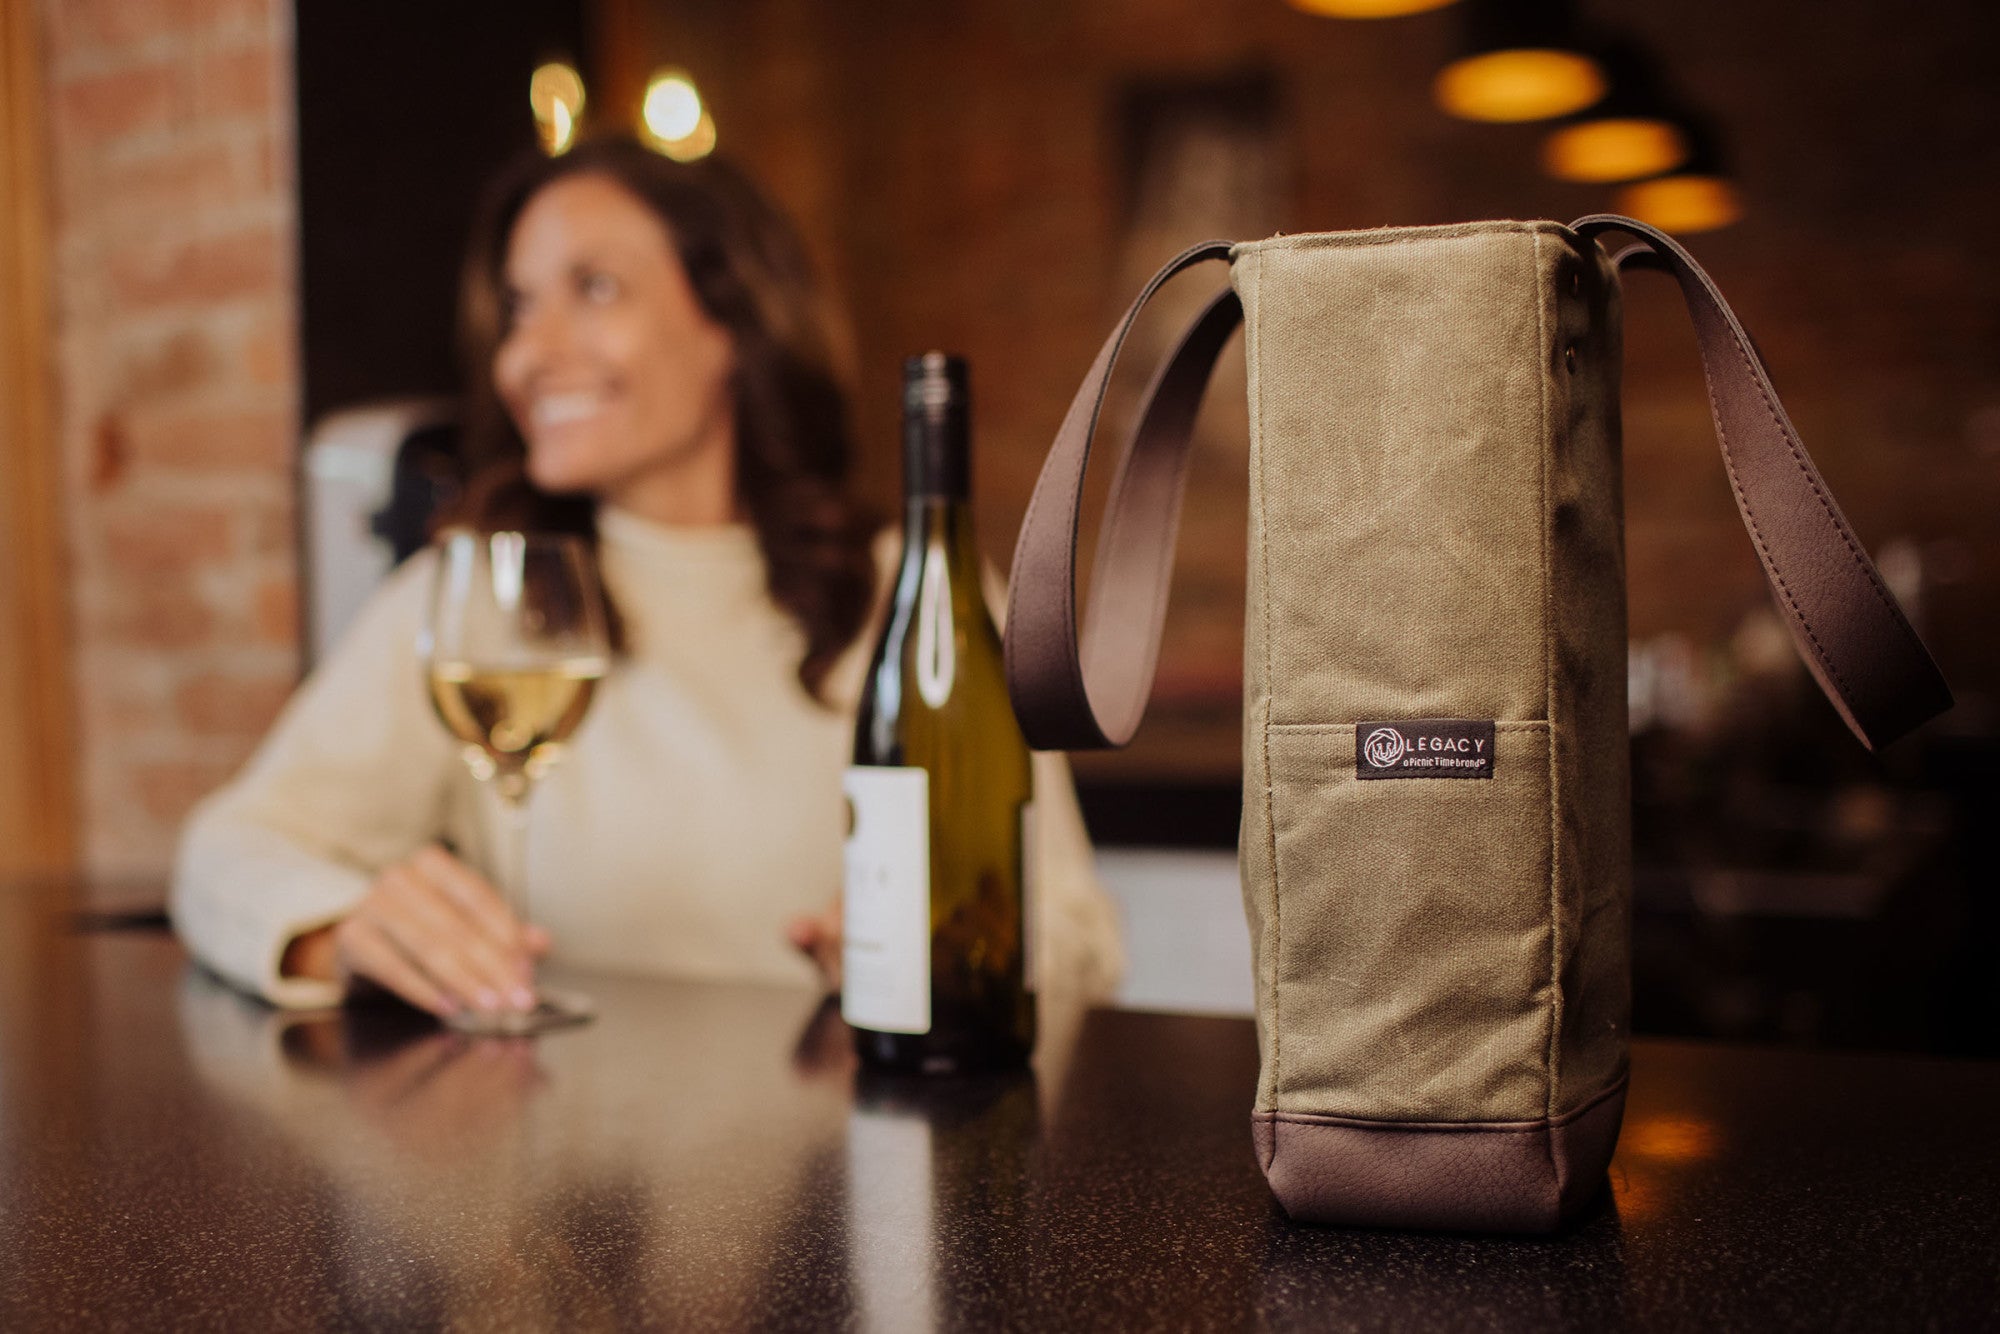 Opux 2 Bottle Wine Bag Tote Carrier | Leakproof Insulated Wine Cooler Bag for Travel Picnic BYOB | Portable Wine Carrying Bag, Padded Protection